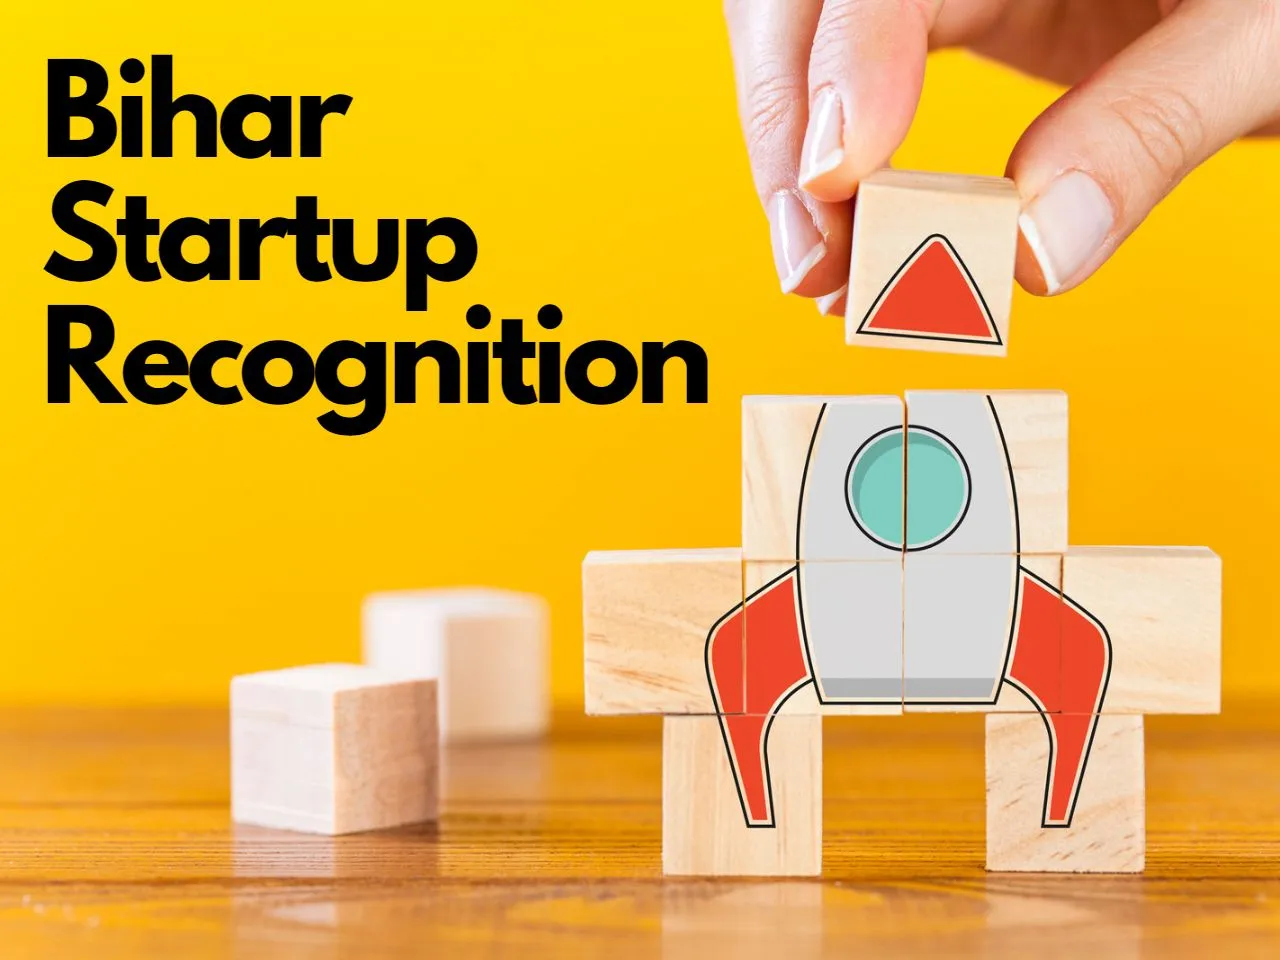 Looking To Build A Startup in Bihar? Know About The State's Recognition Scheme